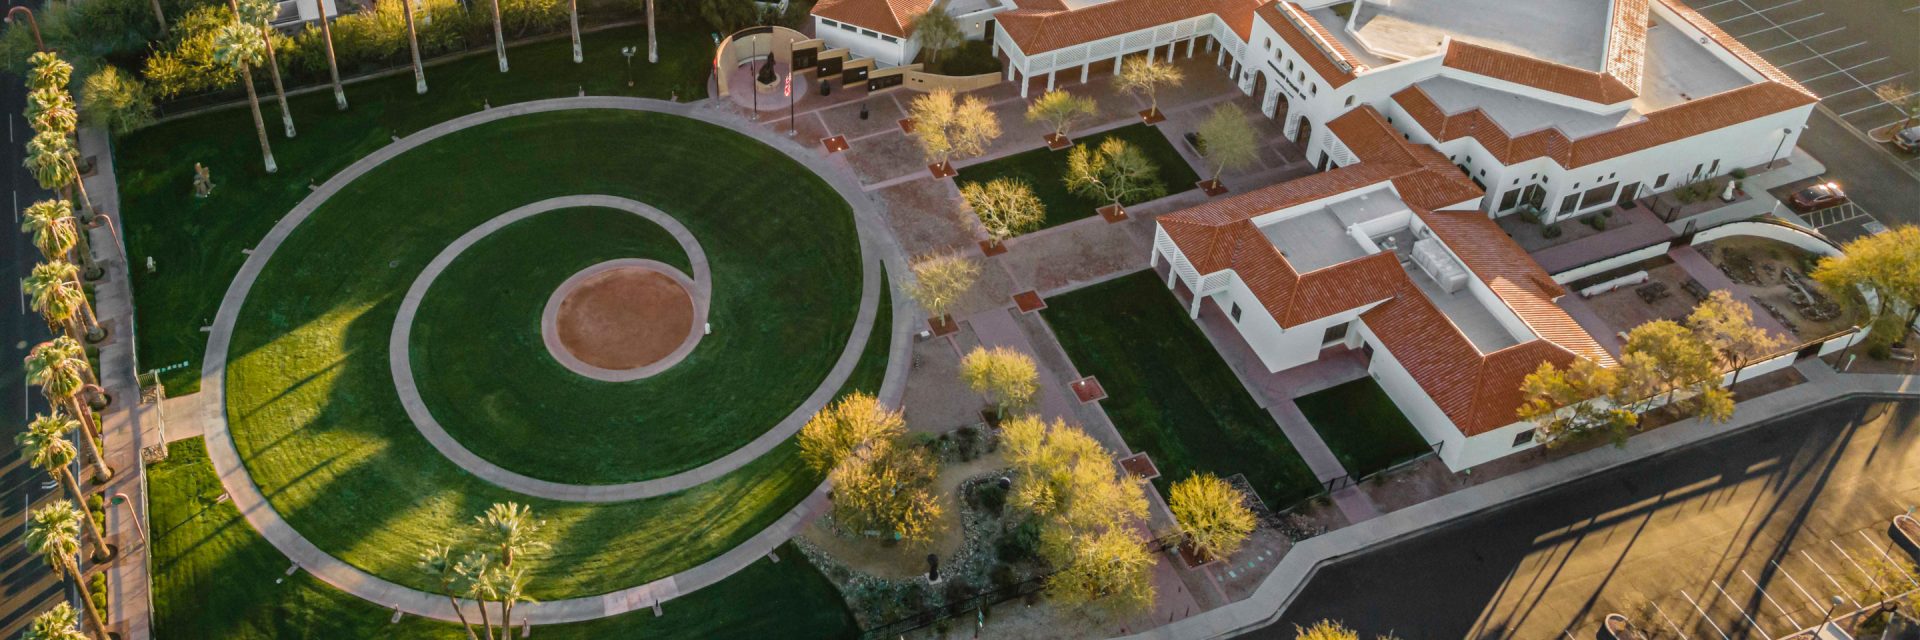 An aerial view of the Heard Museum with a circular lawn.